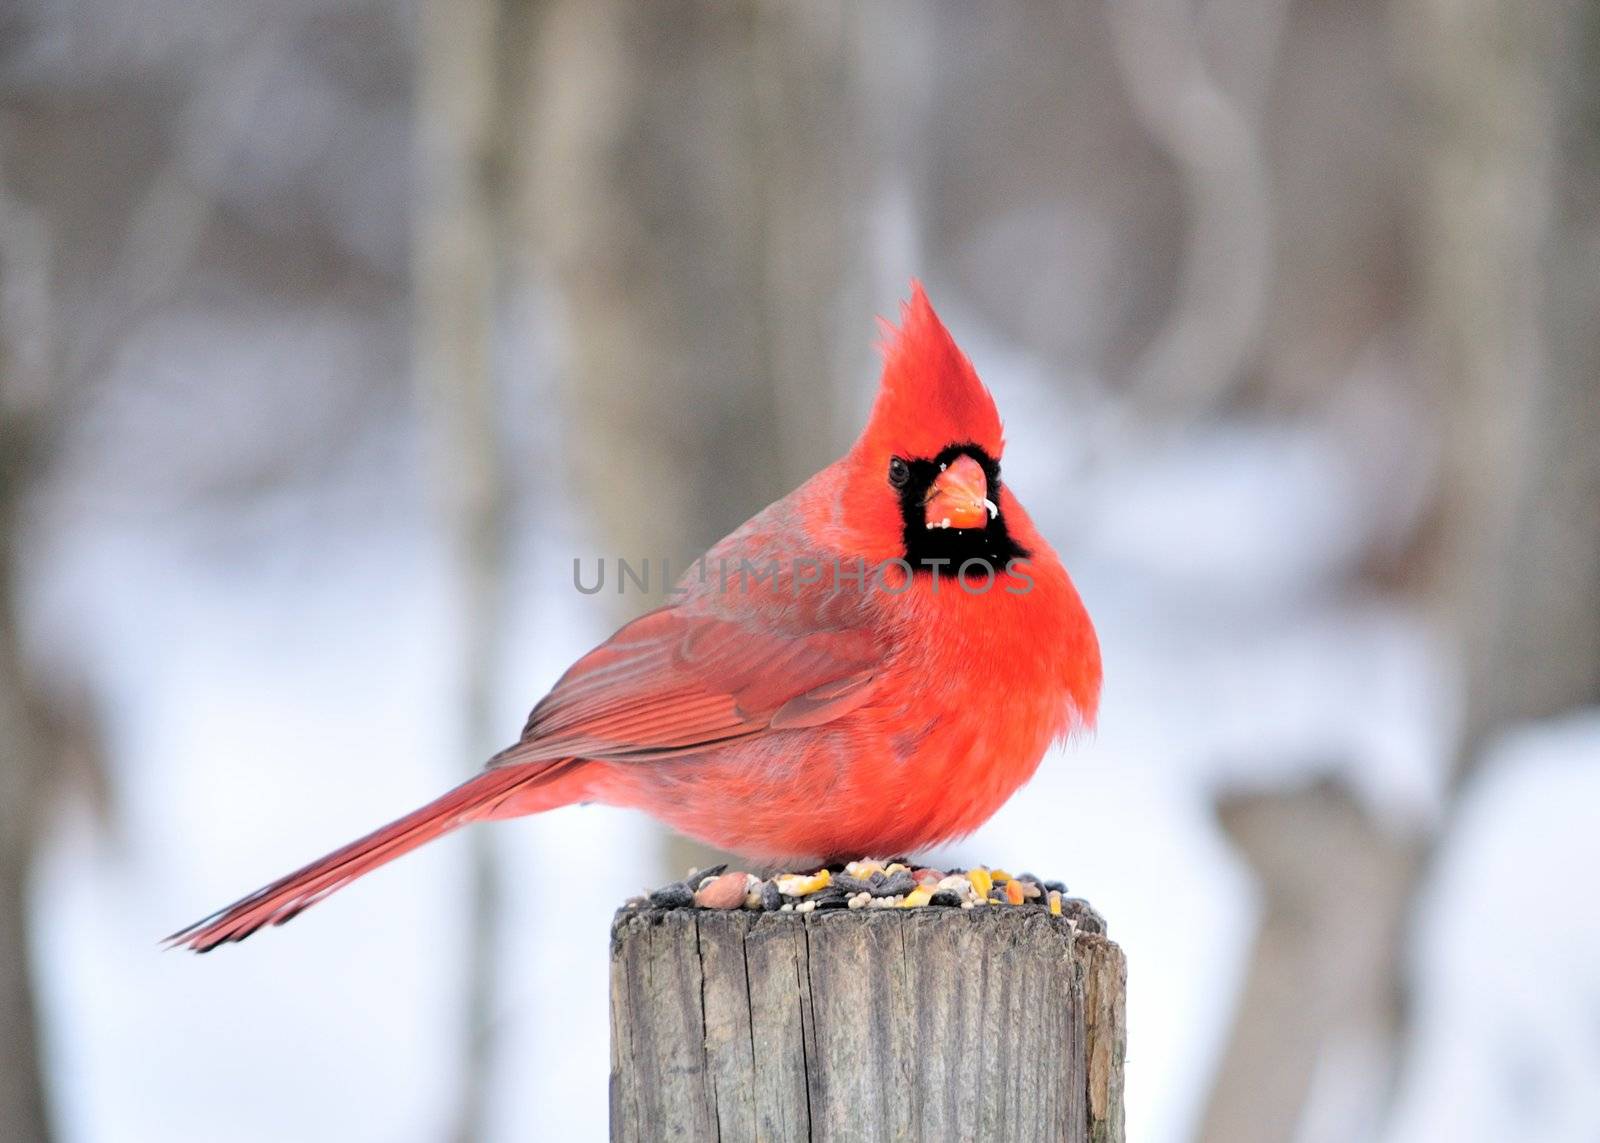 A male cardinal perched on a post with bird seed.